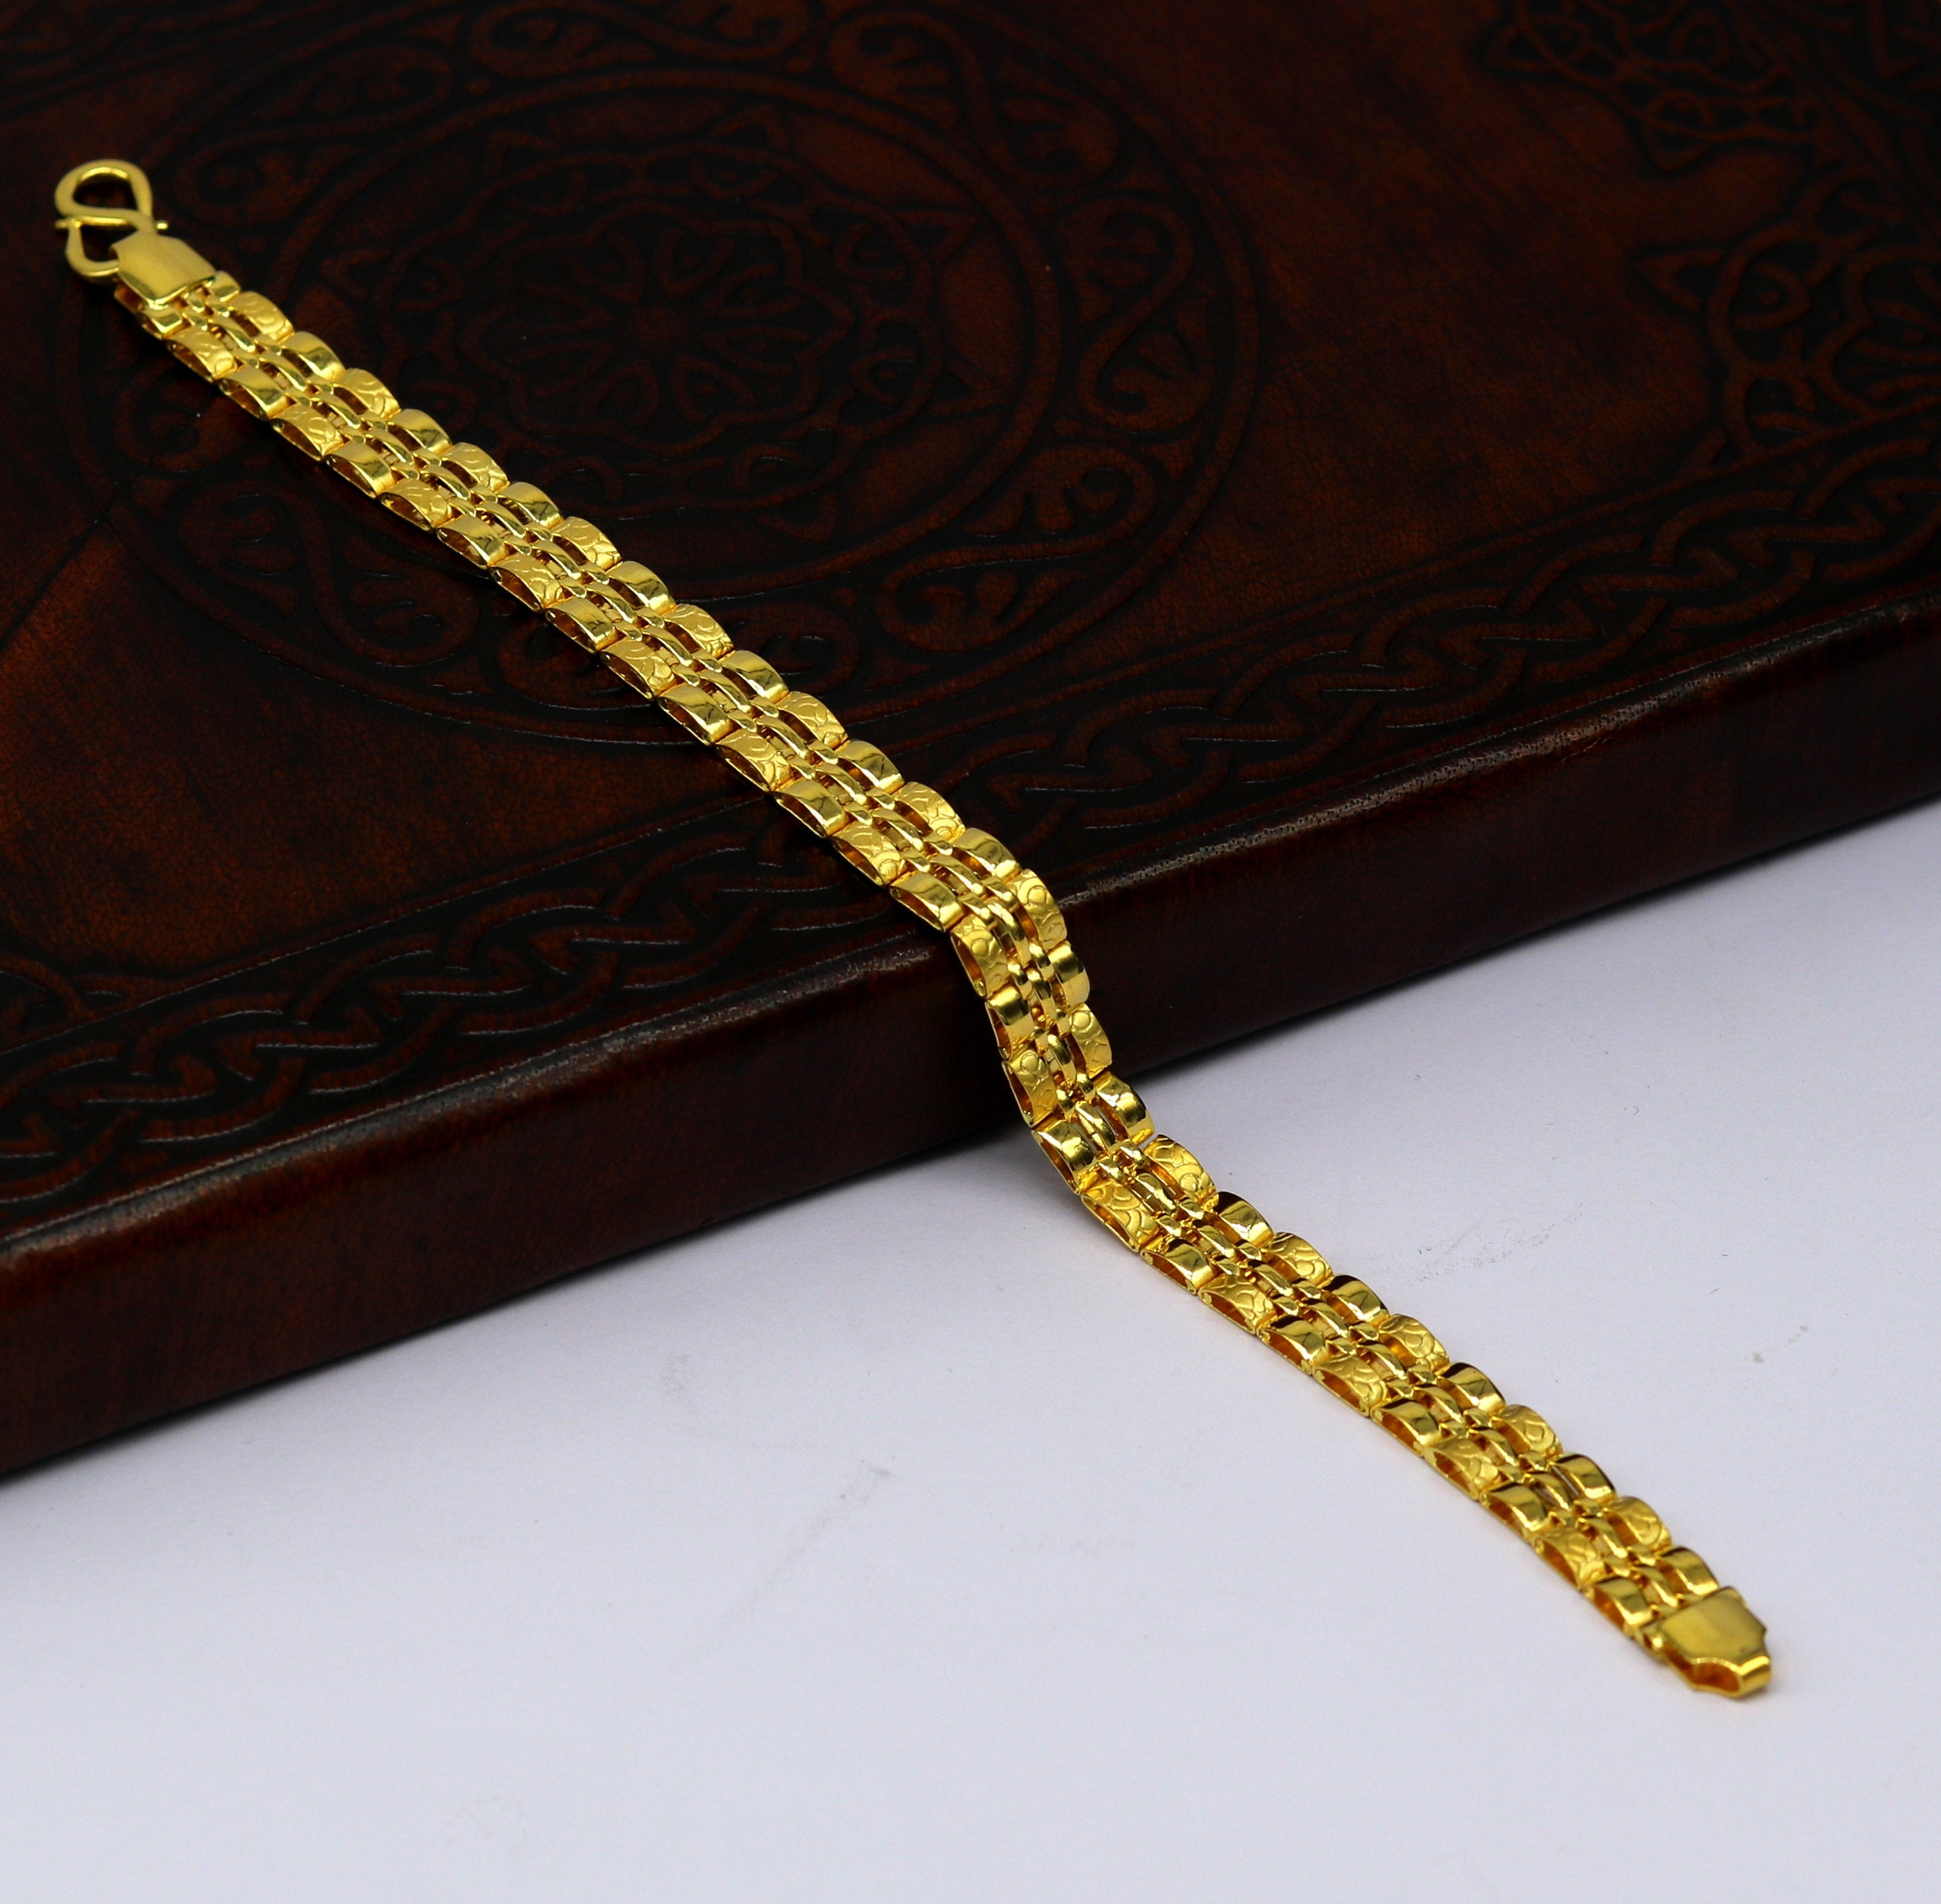 Niscka Exclusive 24K Gold Plated American Diamond Tennis Bracelet Buy  Niscka Exclusive 24K Gold Plated American Diamond Tennis Bracelet Online at  Best Price in India  Nykaa